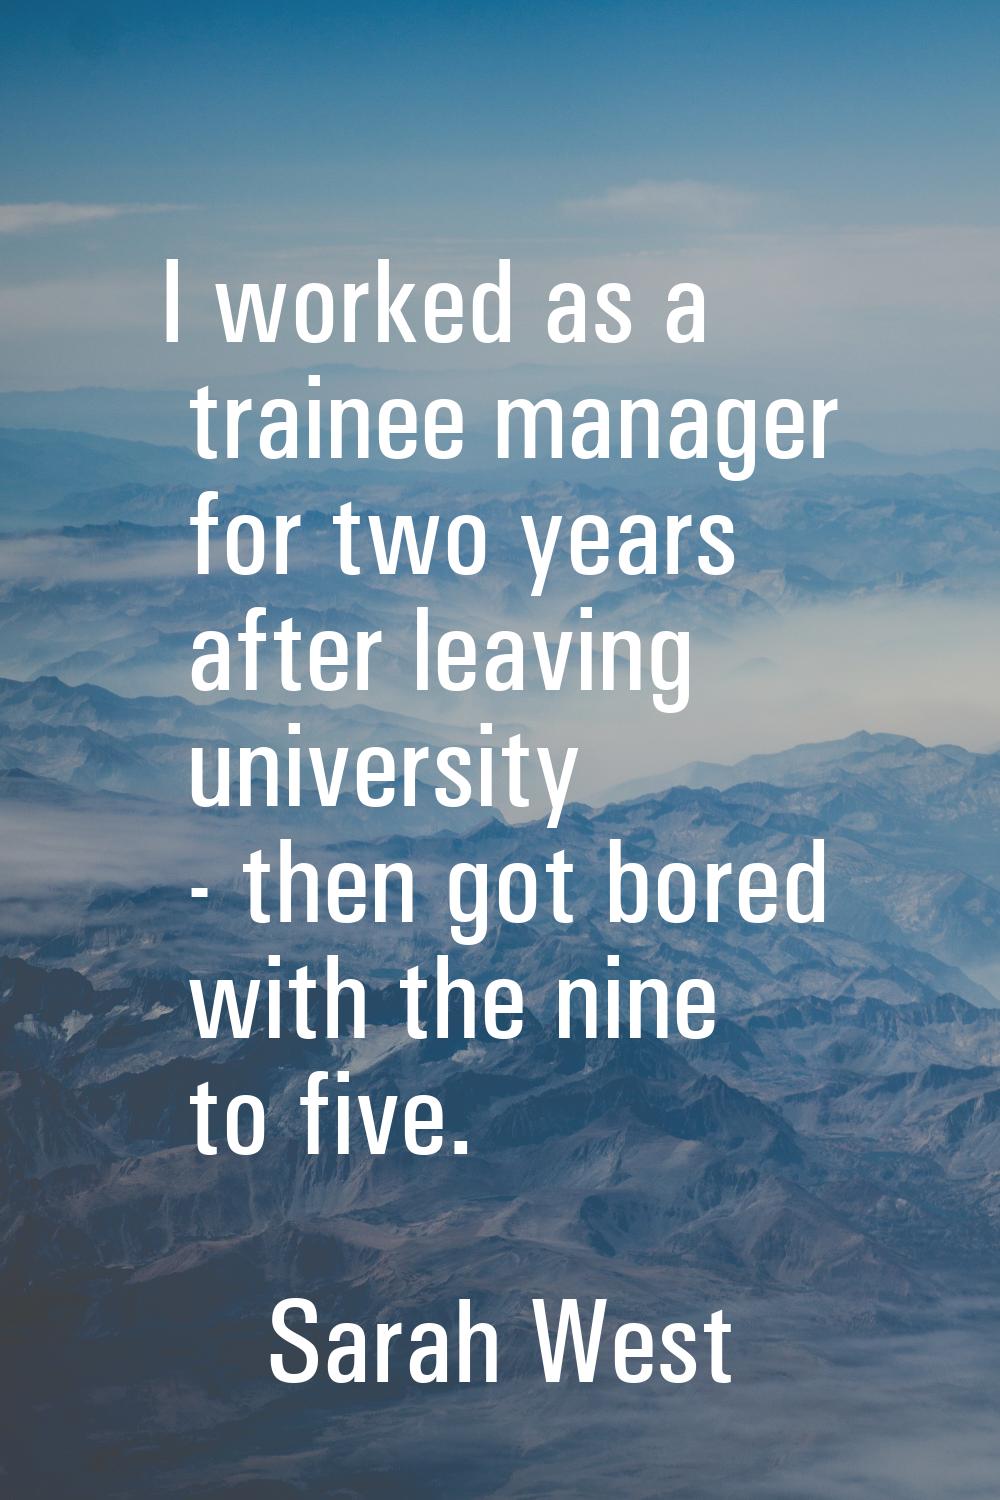 I worked as a trainee manager for two years after leaving university - then got bored with the nine